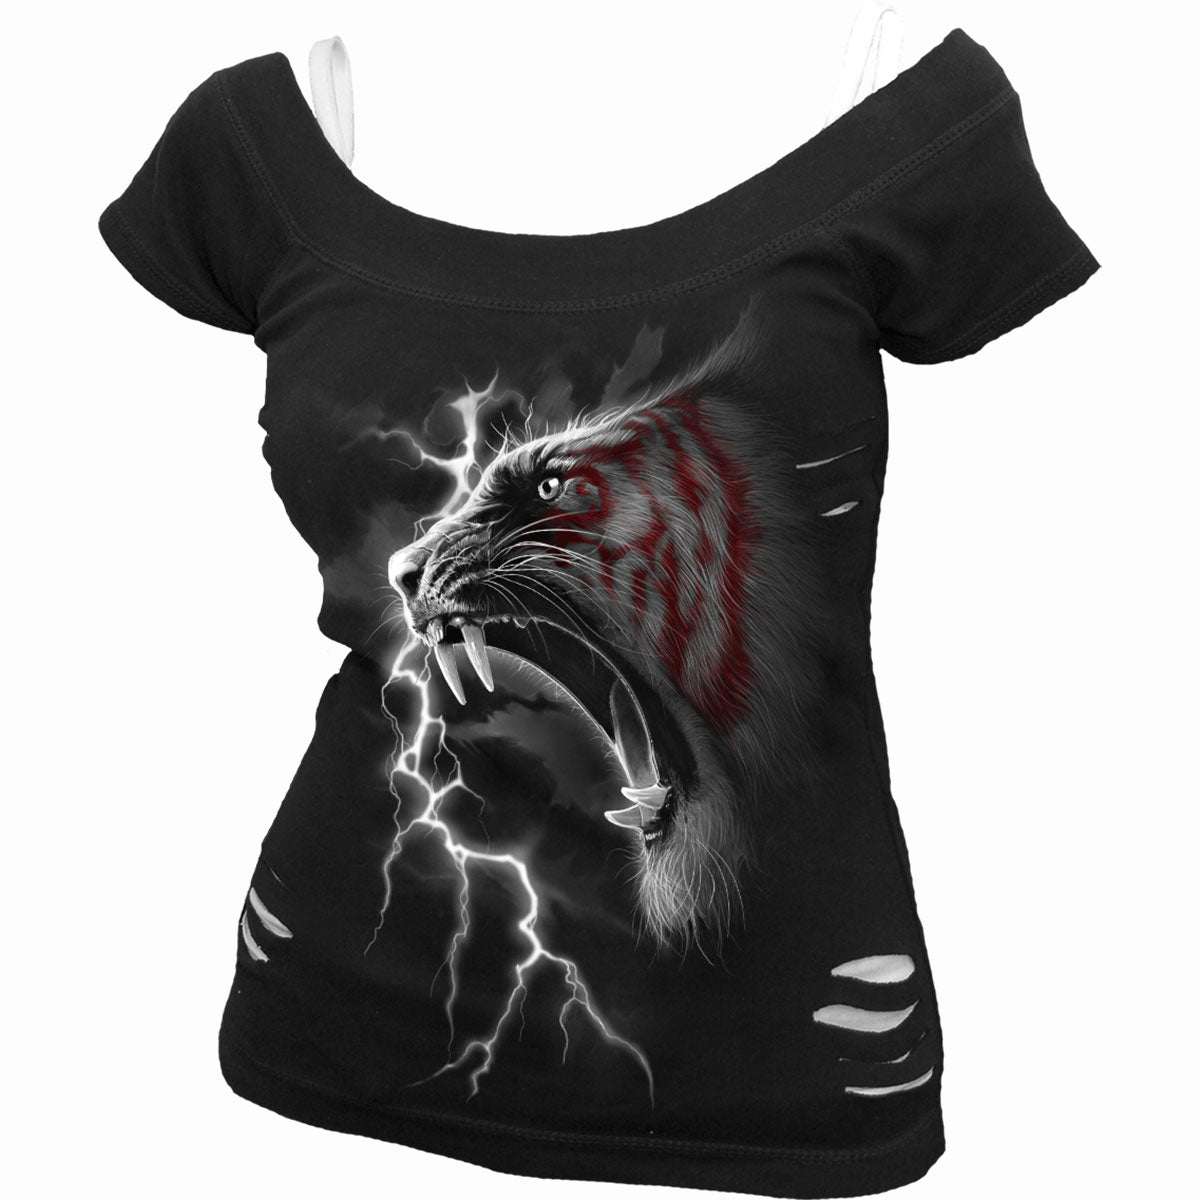 MARK OF THE TIGER - 2in1 White Ripped Top Black